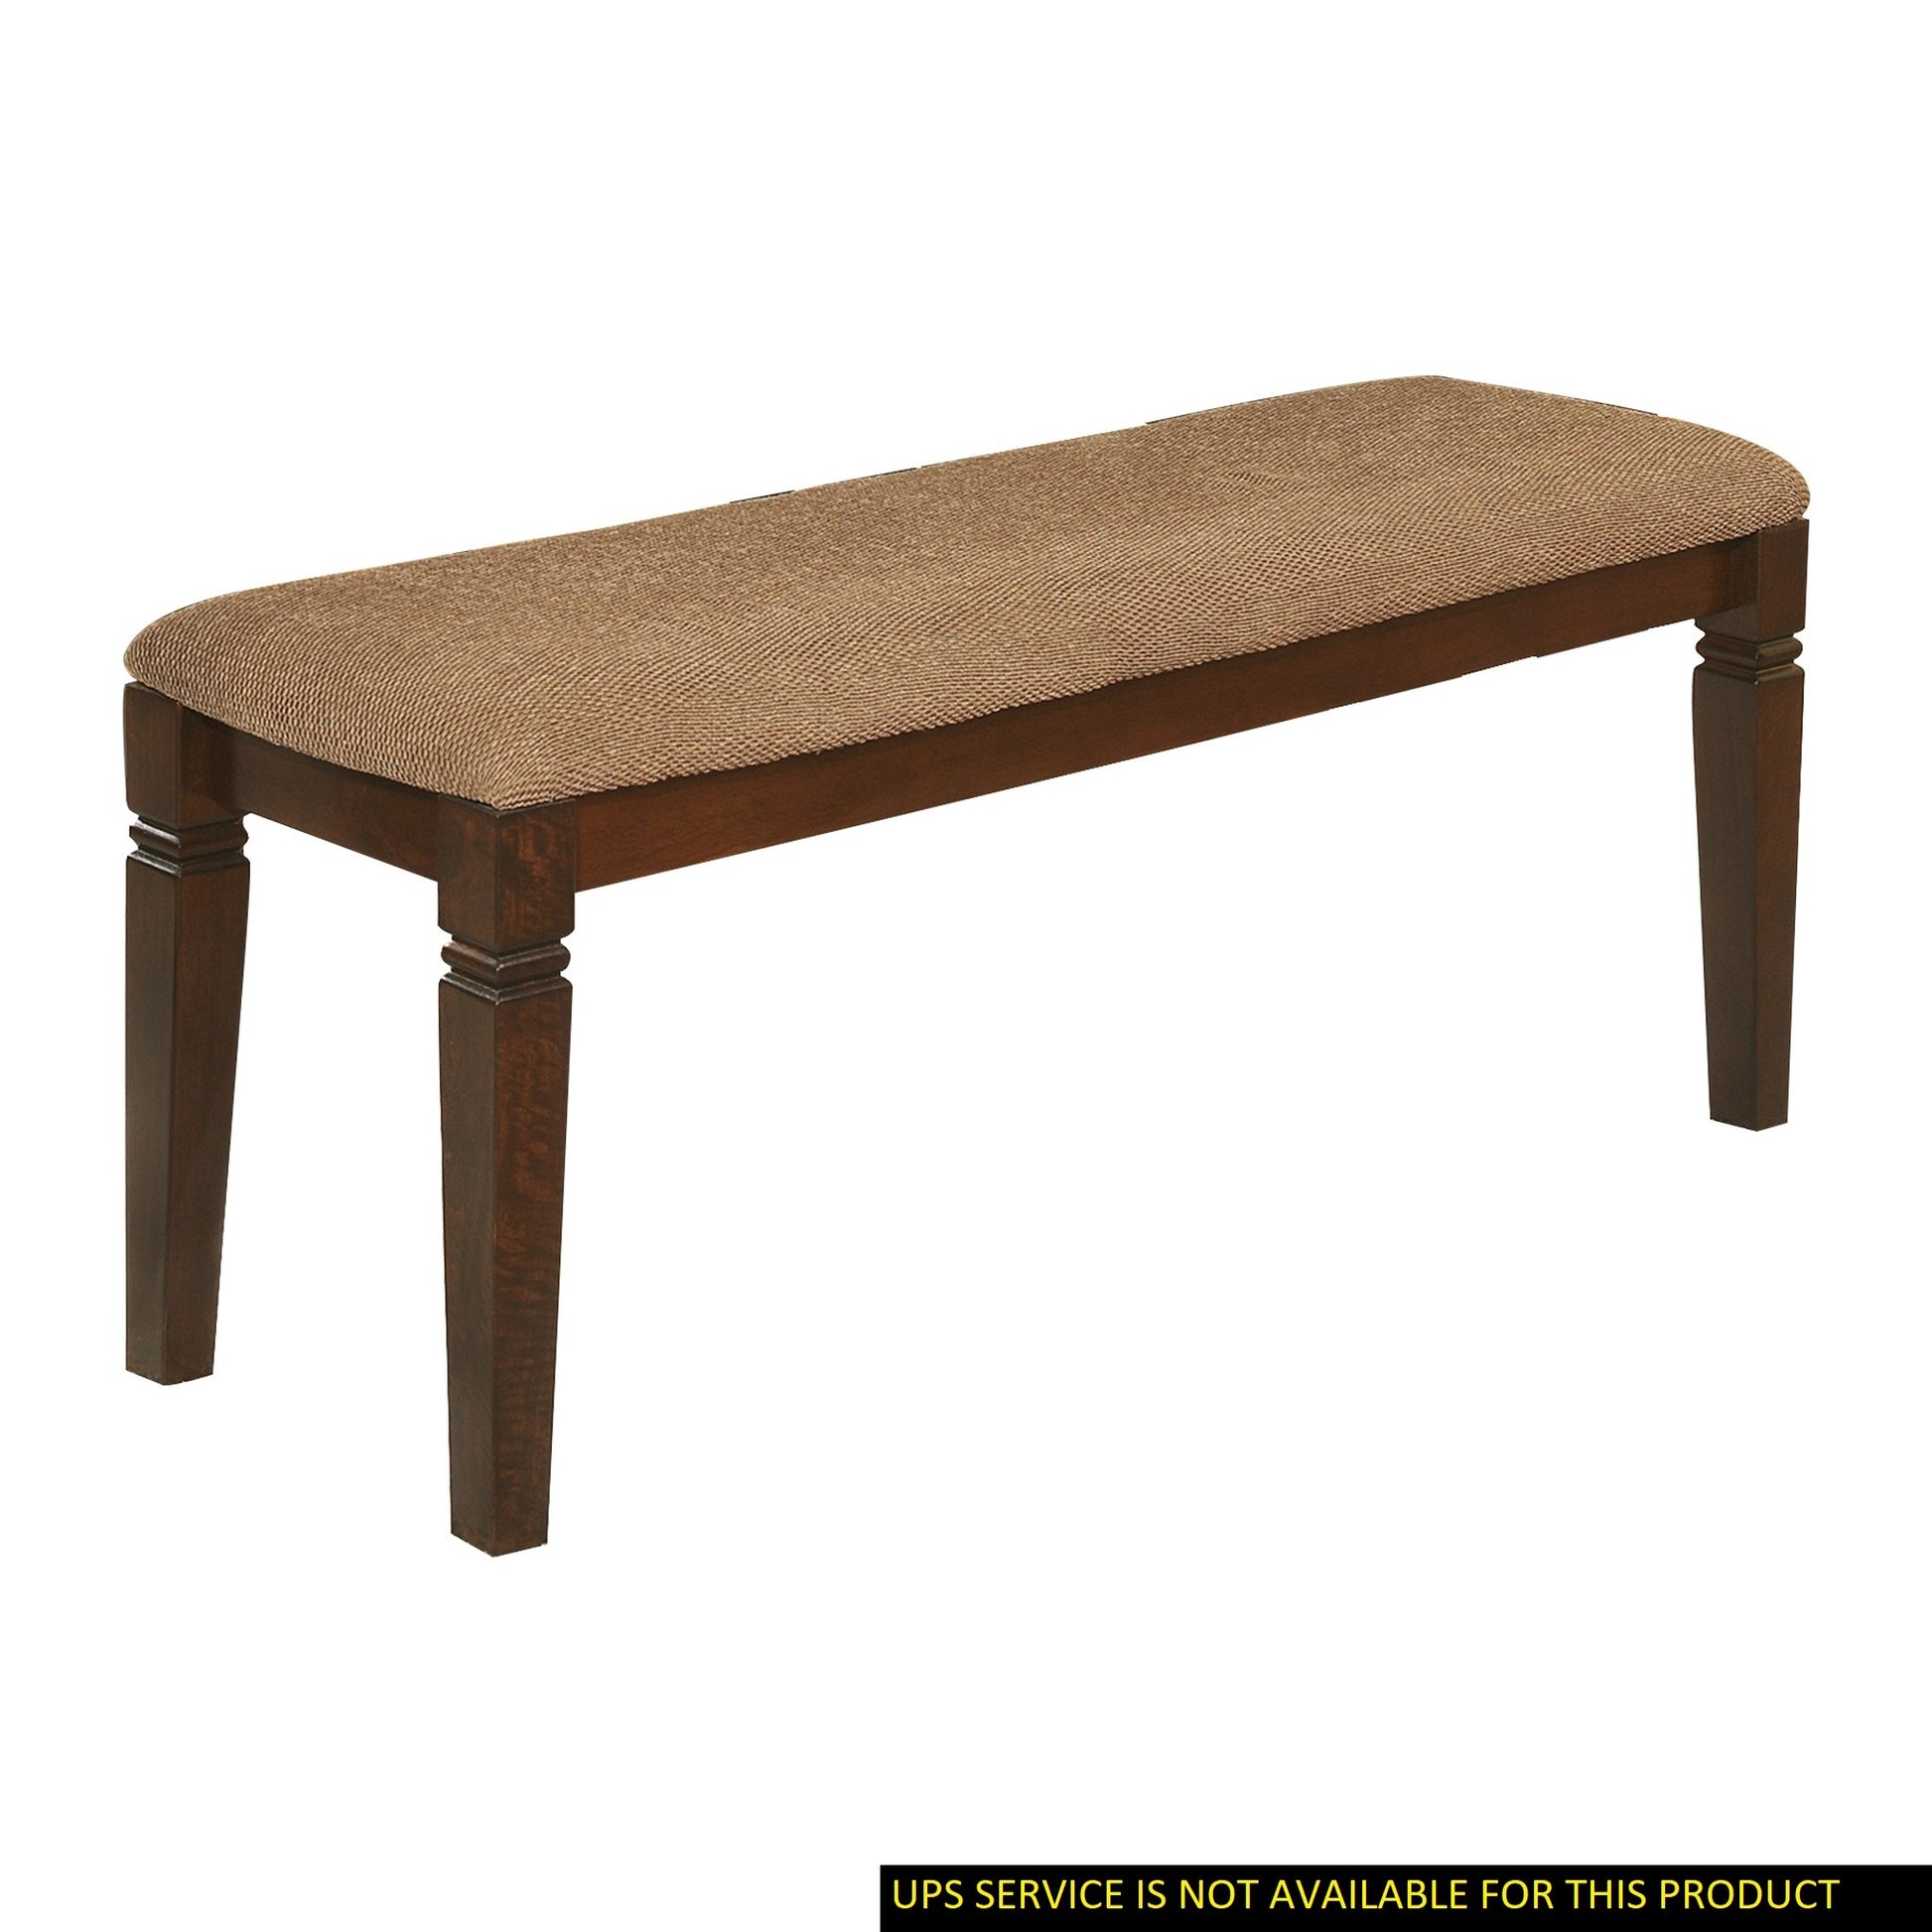 Transitional Style Dining Furniture 1pc Bench Wooden espresso-dining room-transitional-wood